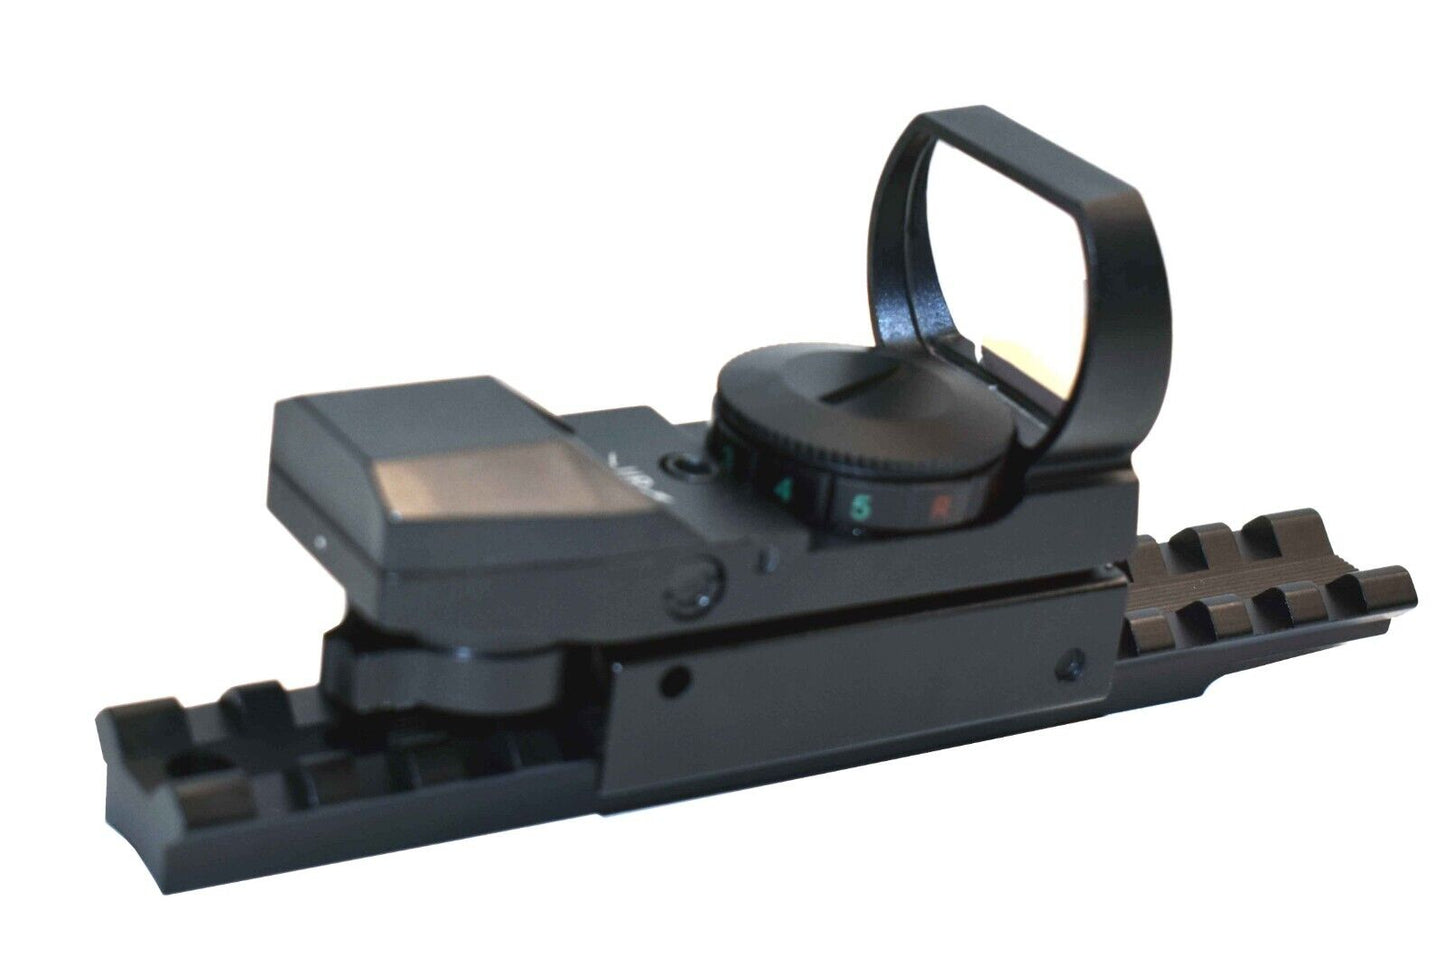 Reflex sight with base mount combo for Winchester SXP Defender 12 gauge pump accessories hunting home defense. - TRINITY SUPPLY INC